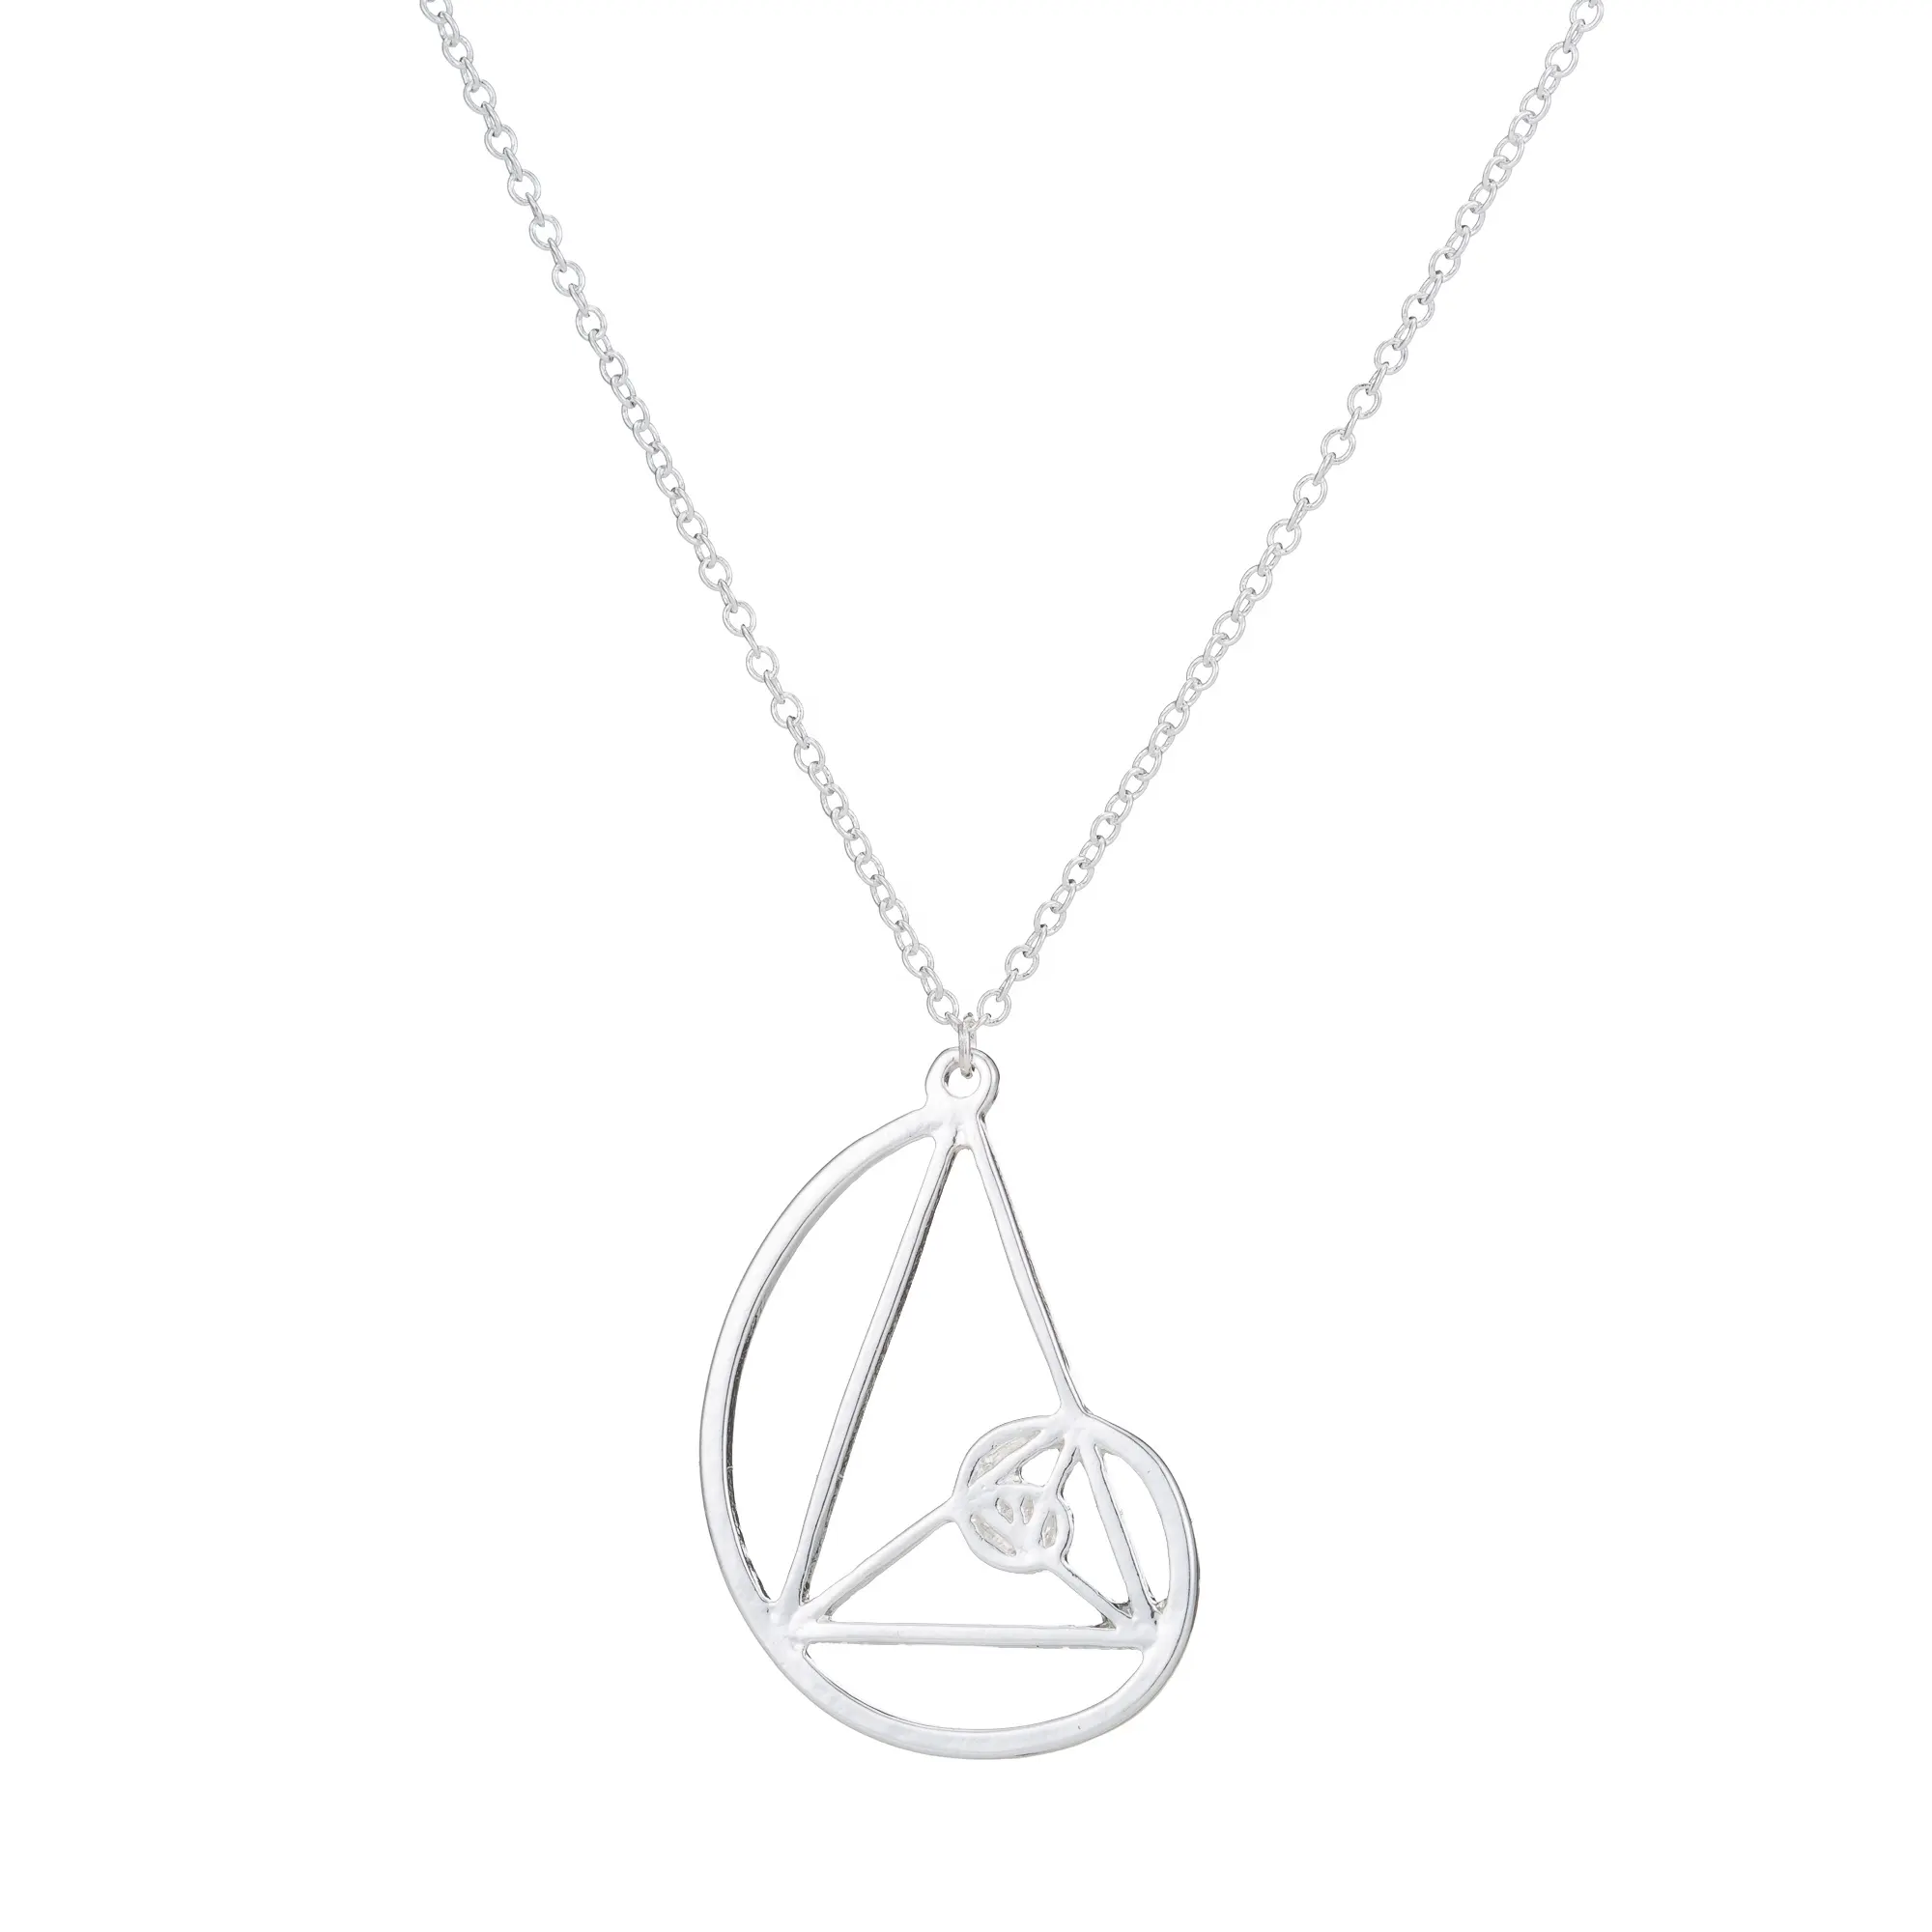 Ratio Psychology Necklace Science Biology Jewelry Stainless Steel Spiral with Triangle Necklace Fibonacci Pendant Women CLASSIC